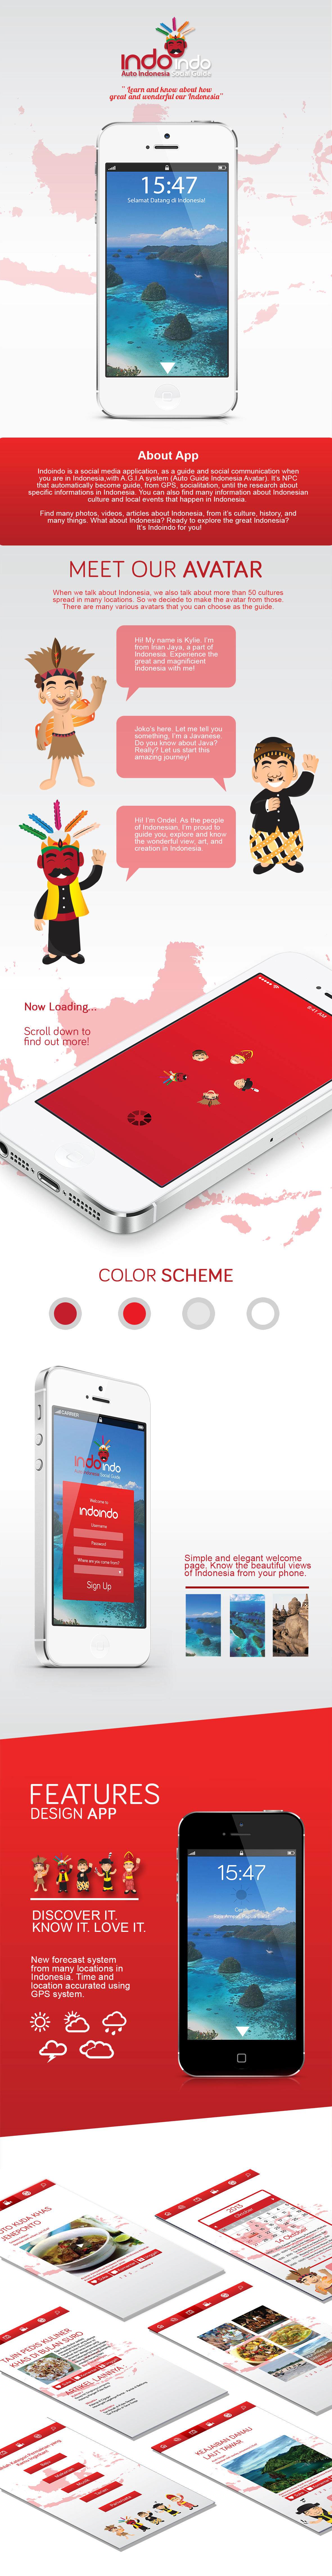 indonesia app concept White red iphone application culture social